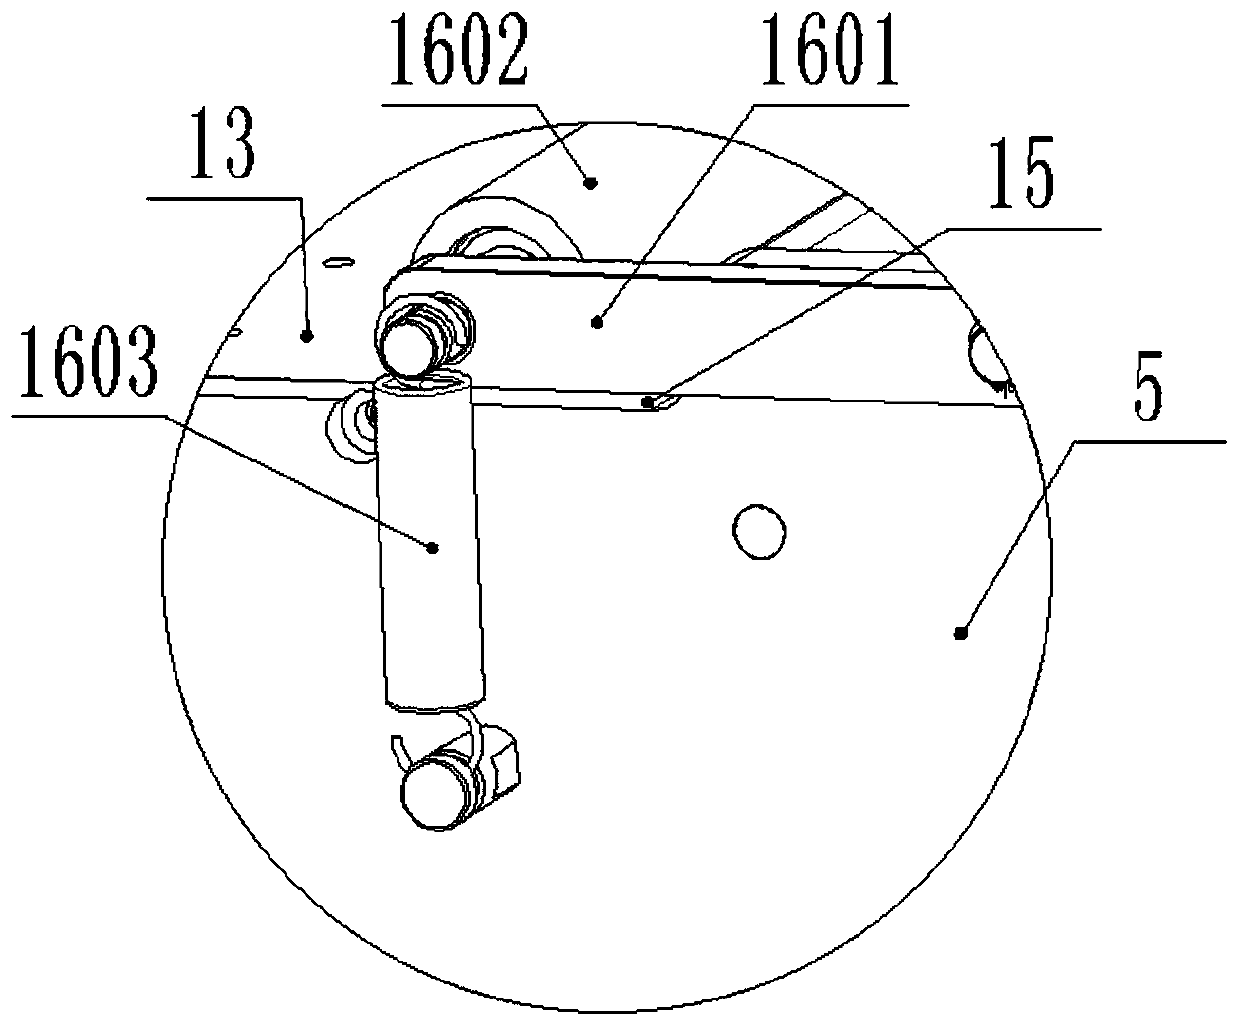 Rewinding device for label detection